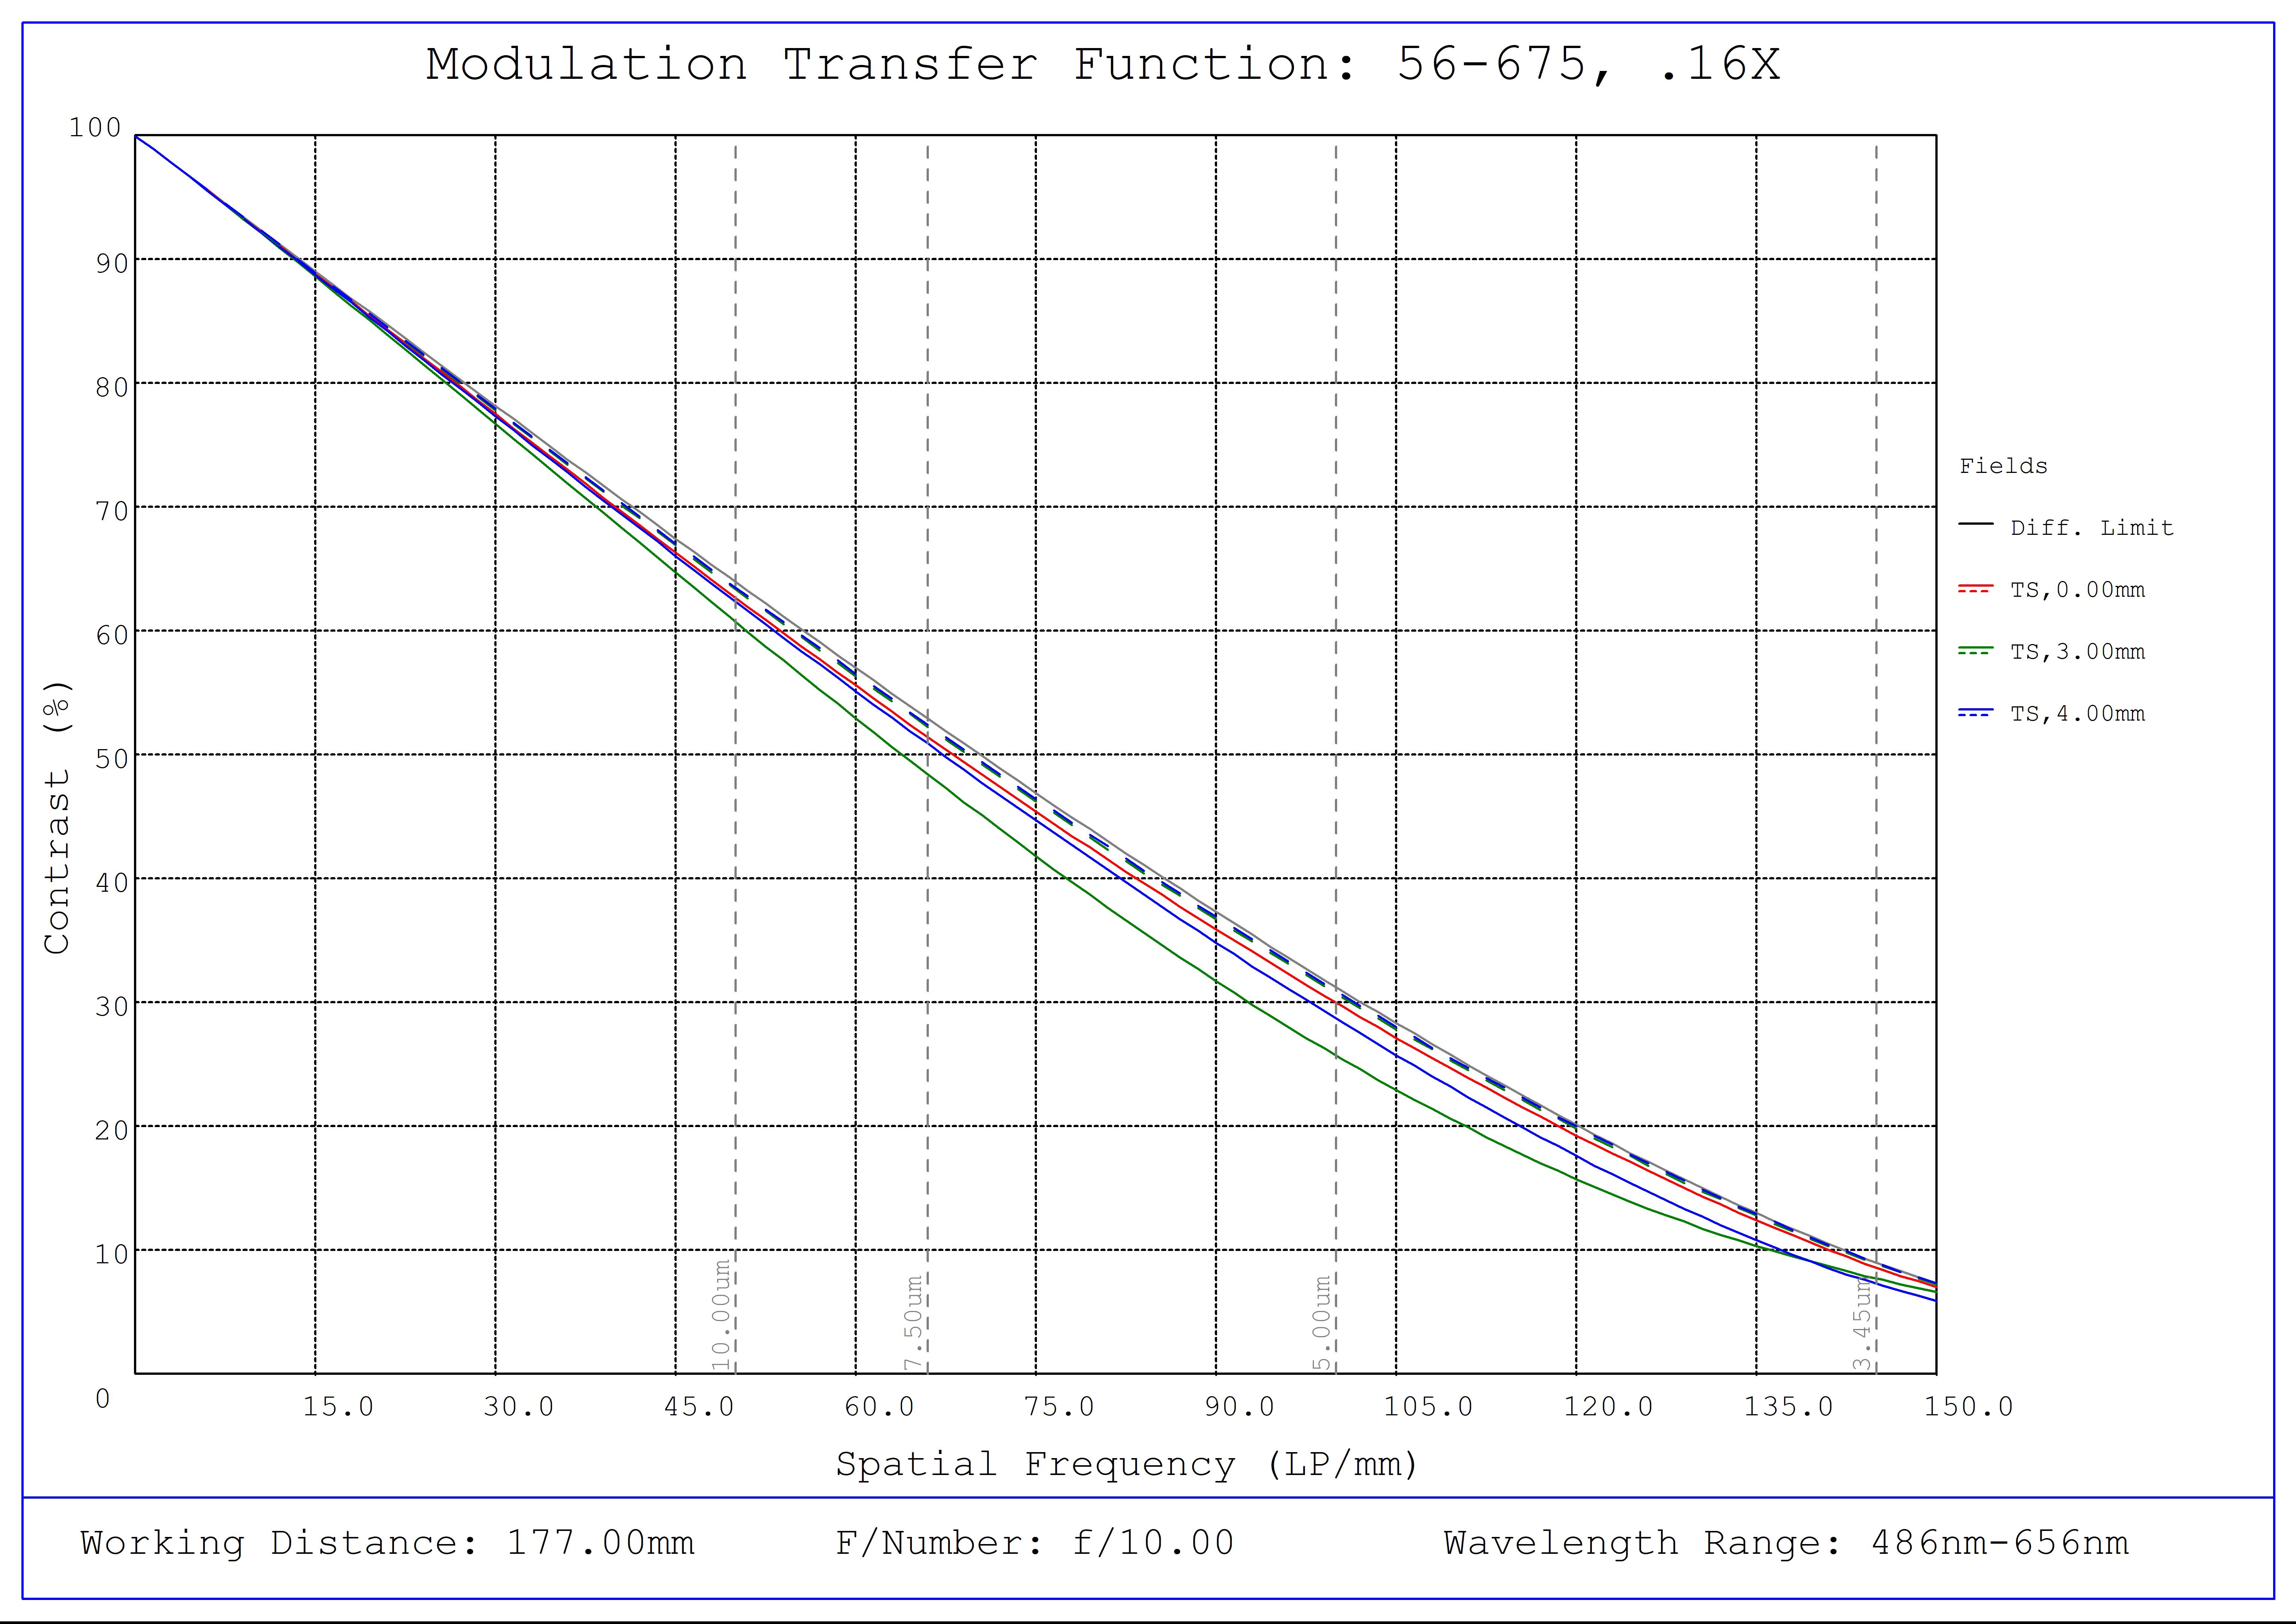 #56-675, 0.16X SilverTL™ Telecentric Lens, Modulated Transfer Function (MTF) Plot, 177mm Working Distance, f10